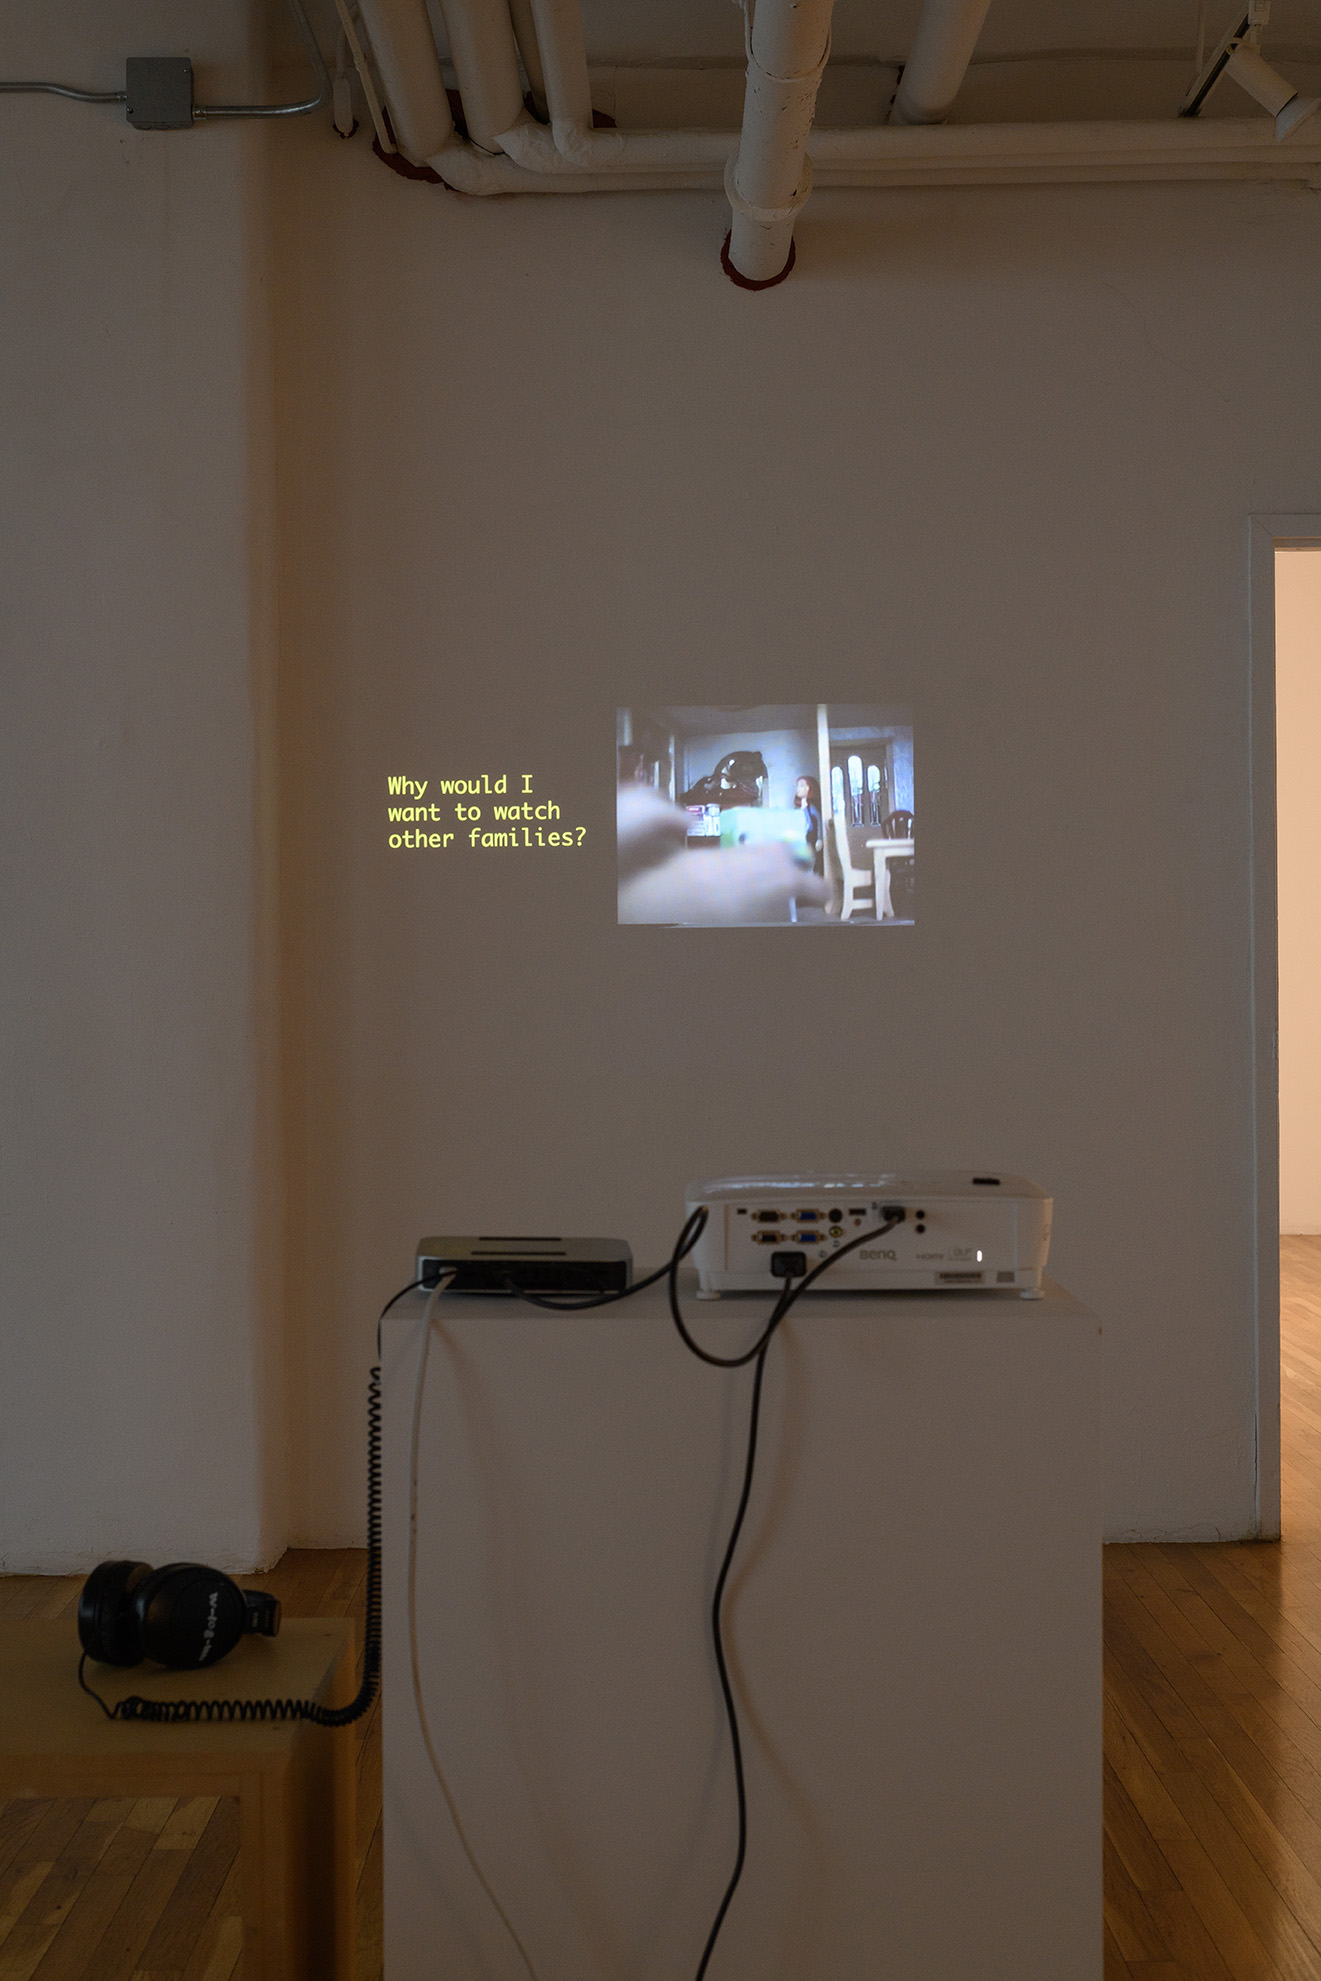 [A video projection. Both the projected image and the projector machine, media player, and cabling, all sit on a white plinth. The projected image shows a small image of the interior of a doll house with blurry hands in the foreground. To the left of the image, yellow text reads, quote: “Why would I want to watch other families?”]